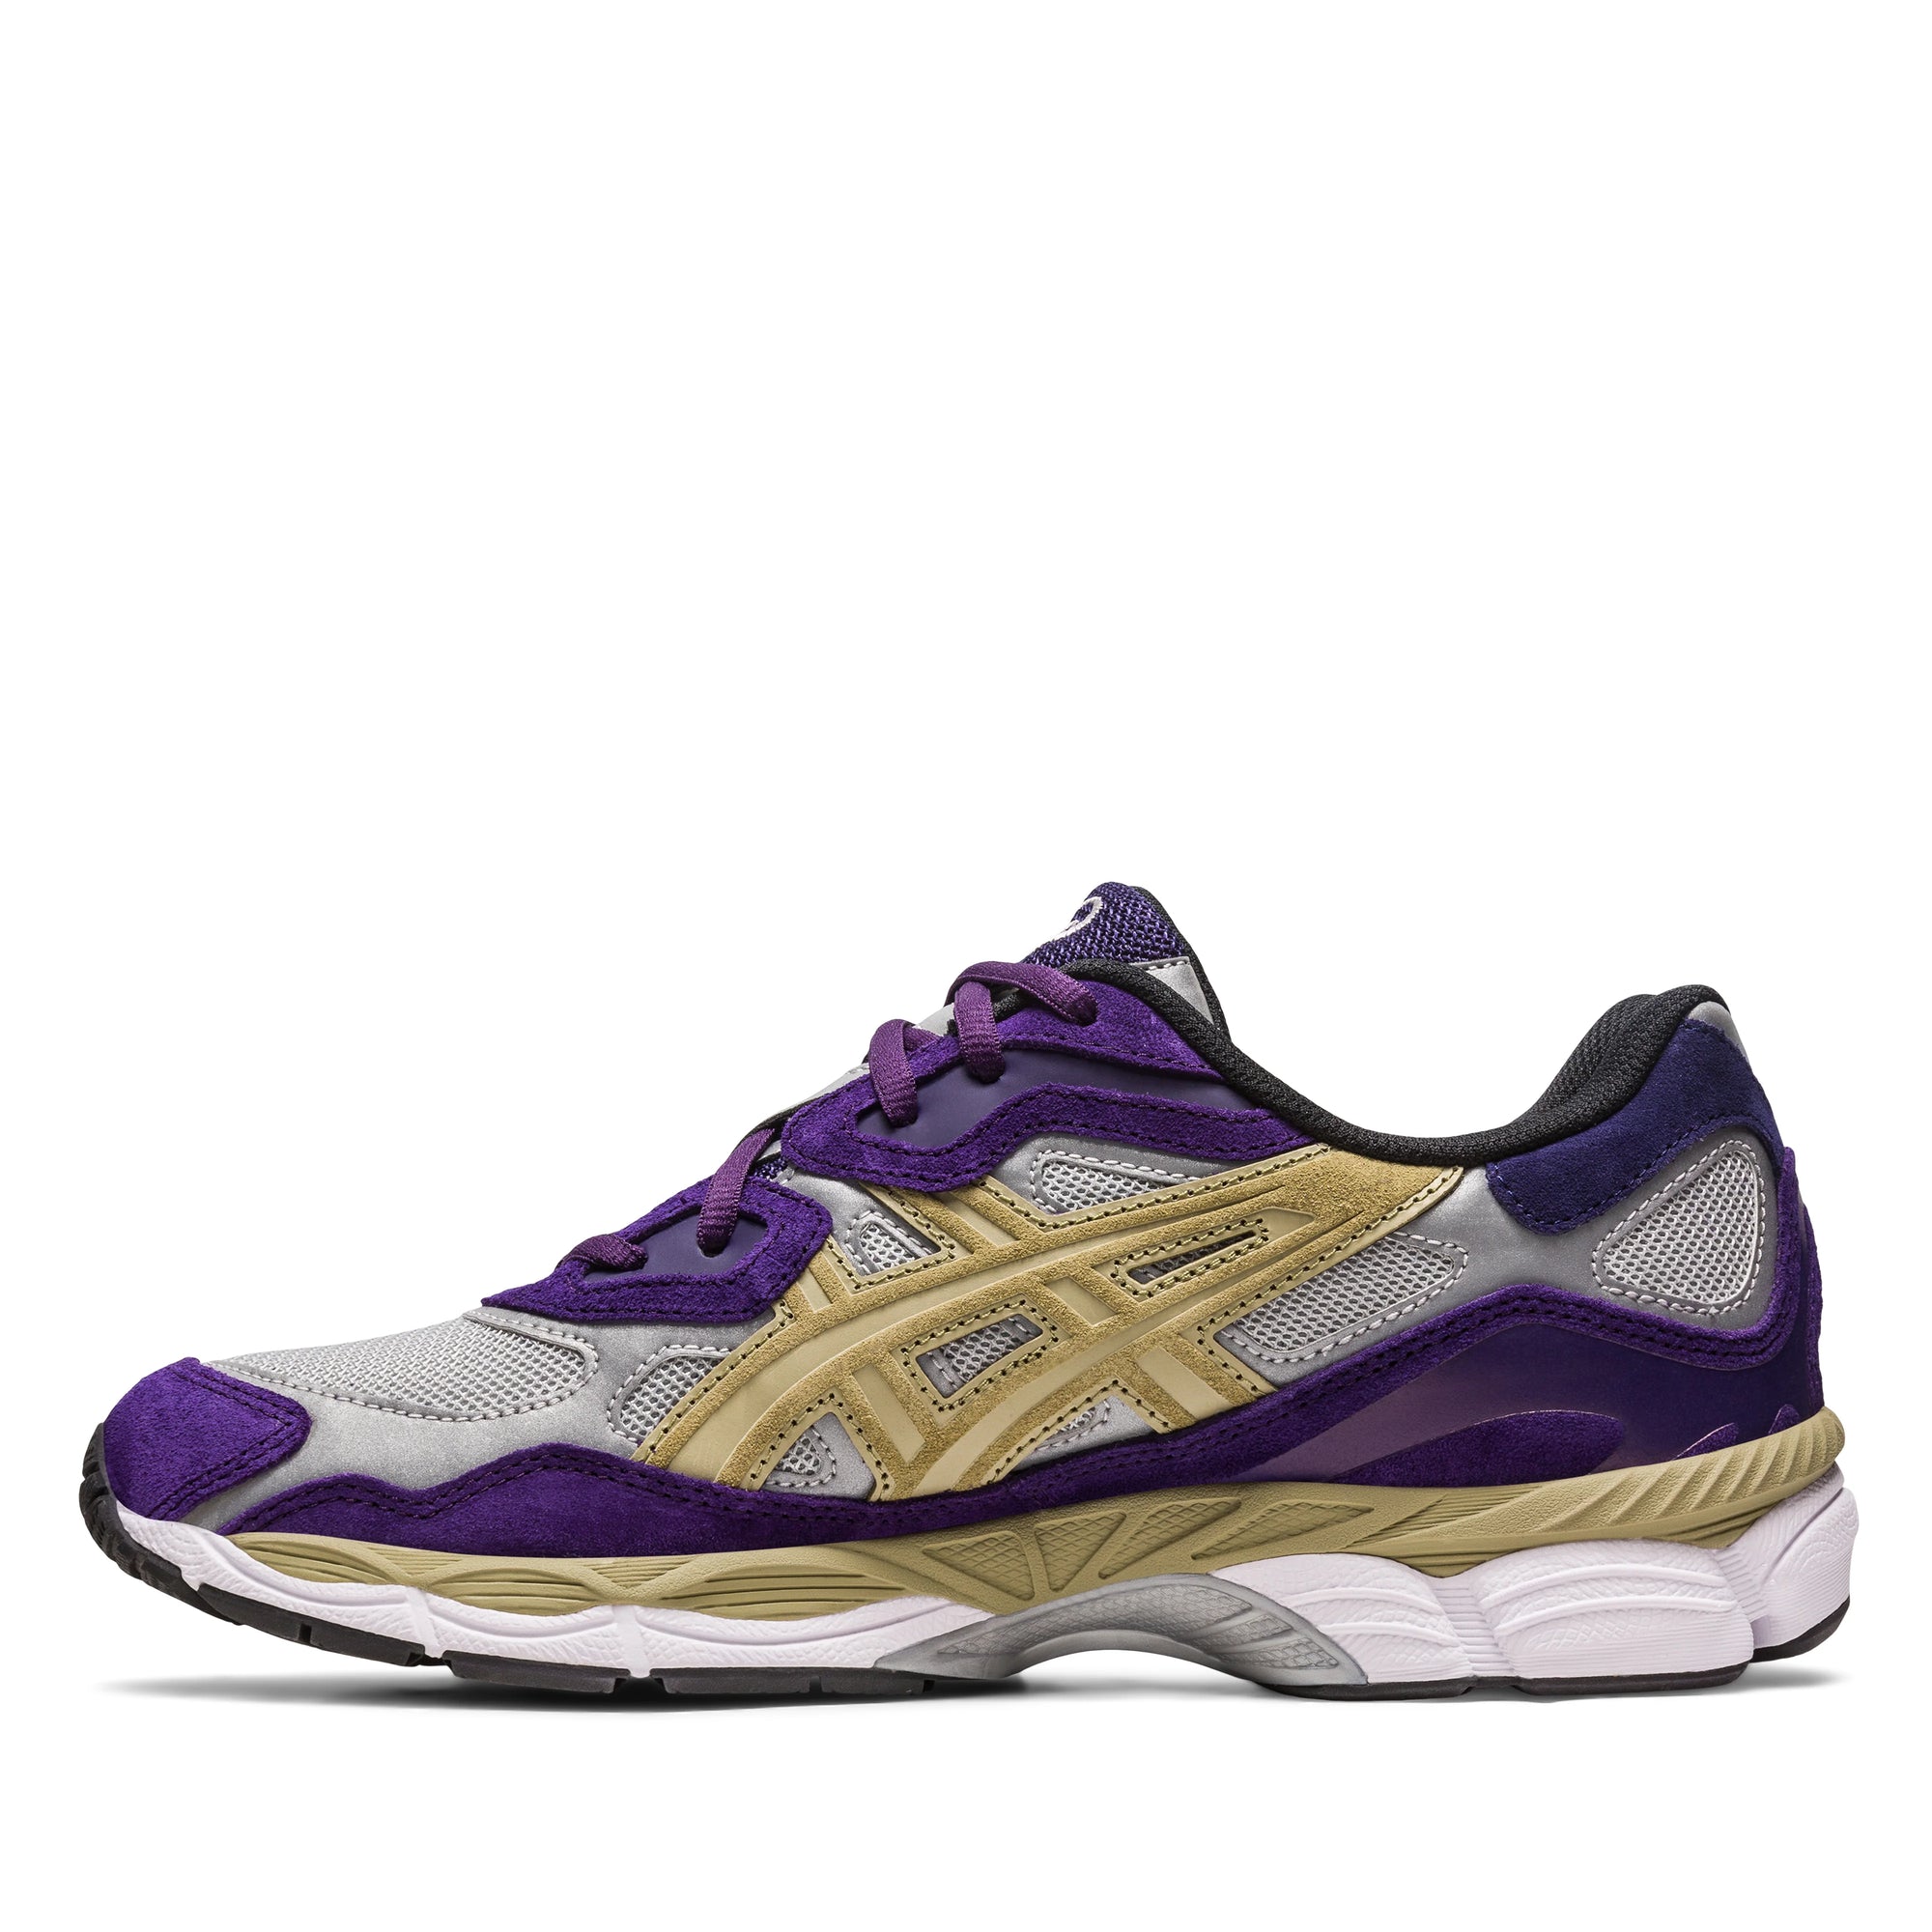 ASICS - GEL-NYC - (Pure Silver/Gothic Grape) view 2